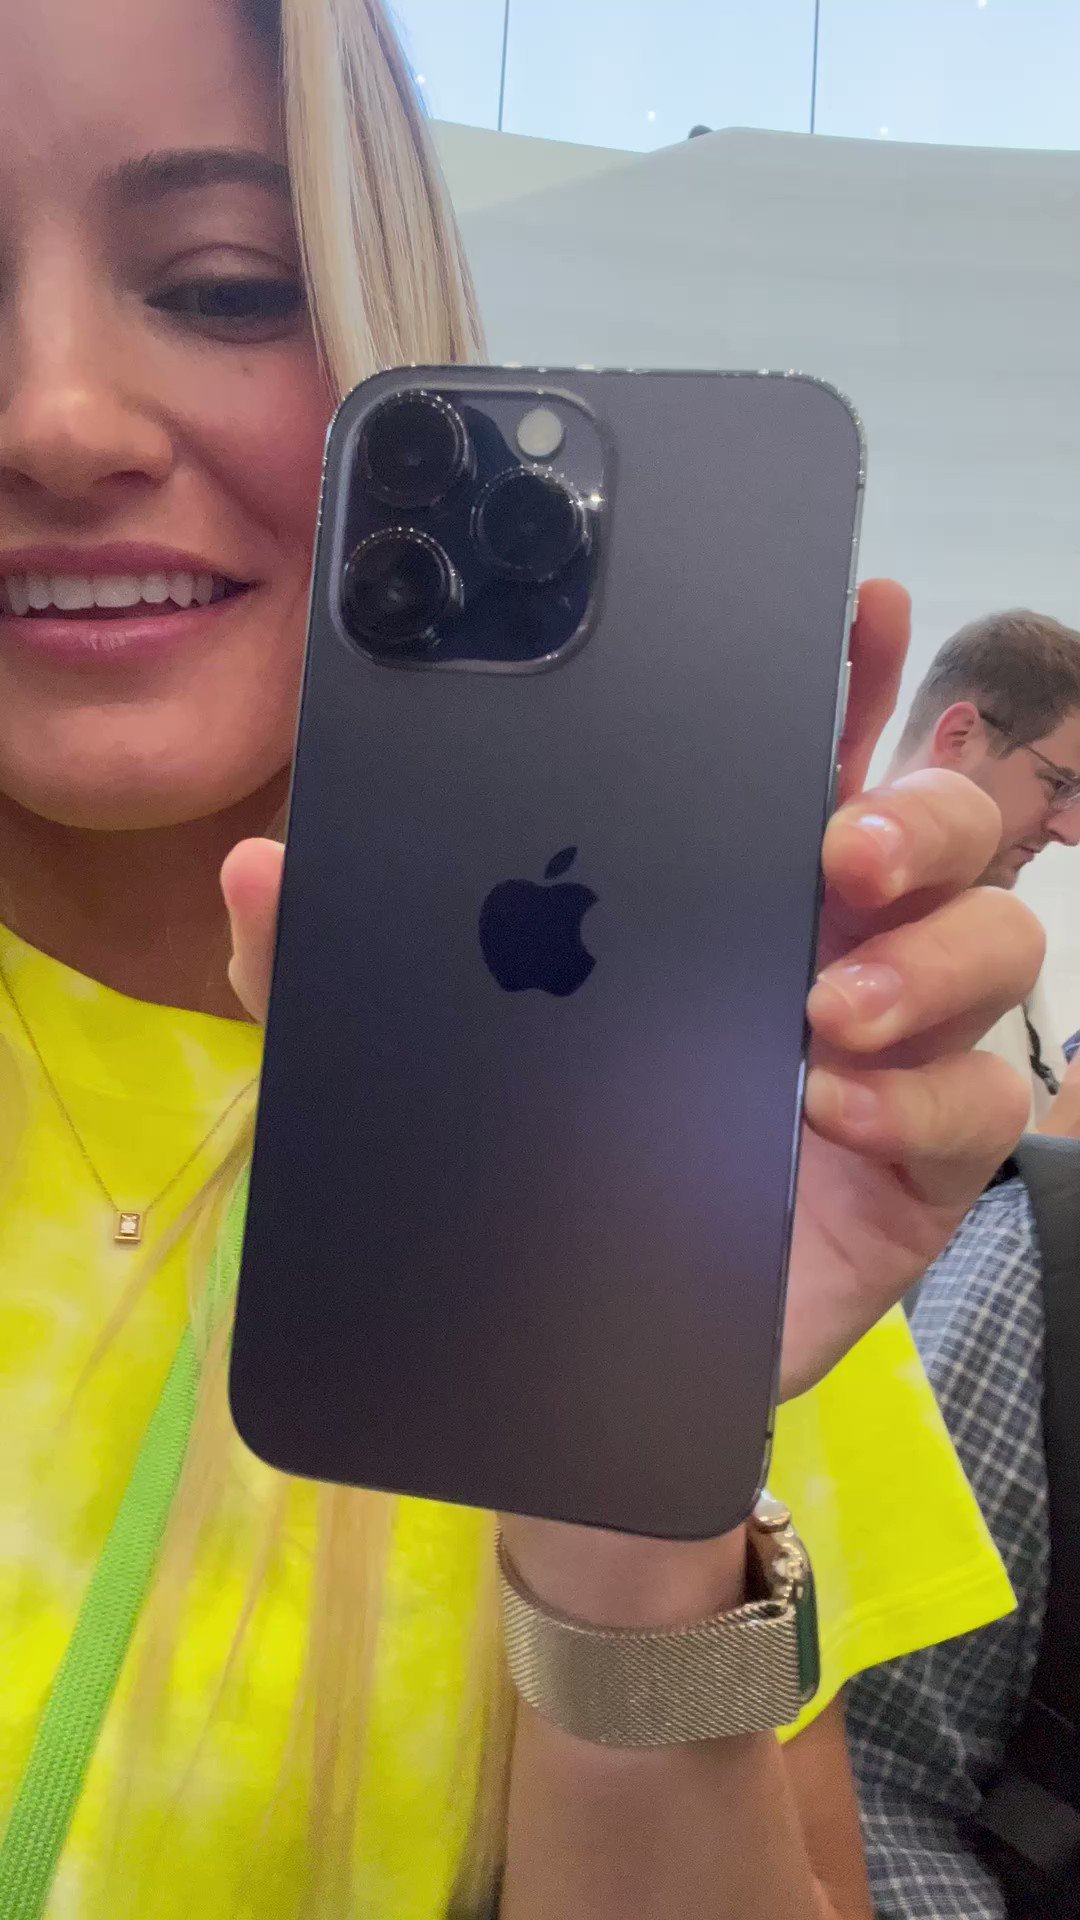 iJustine on Twitter: "Here’s the new iPhone 14 Pro Max in purple! #